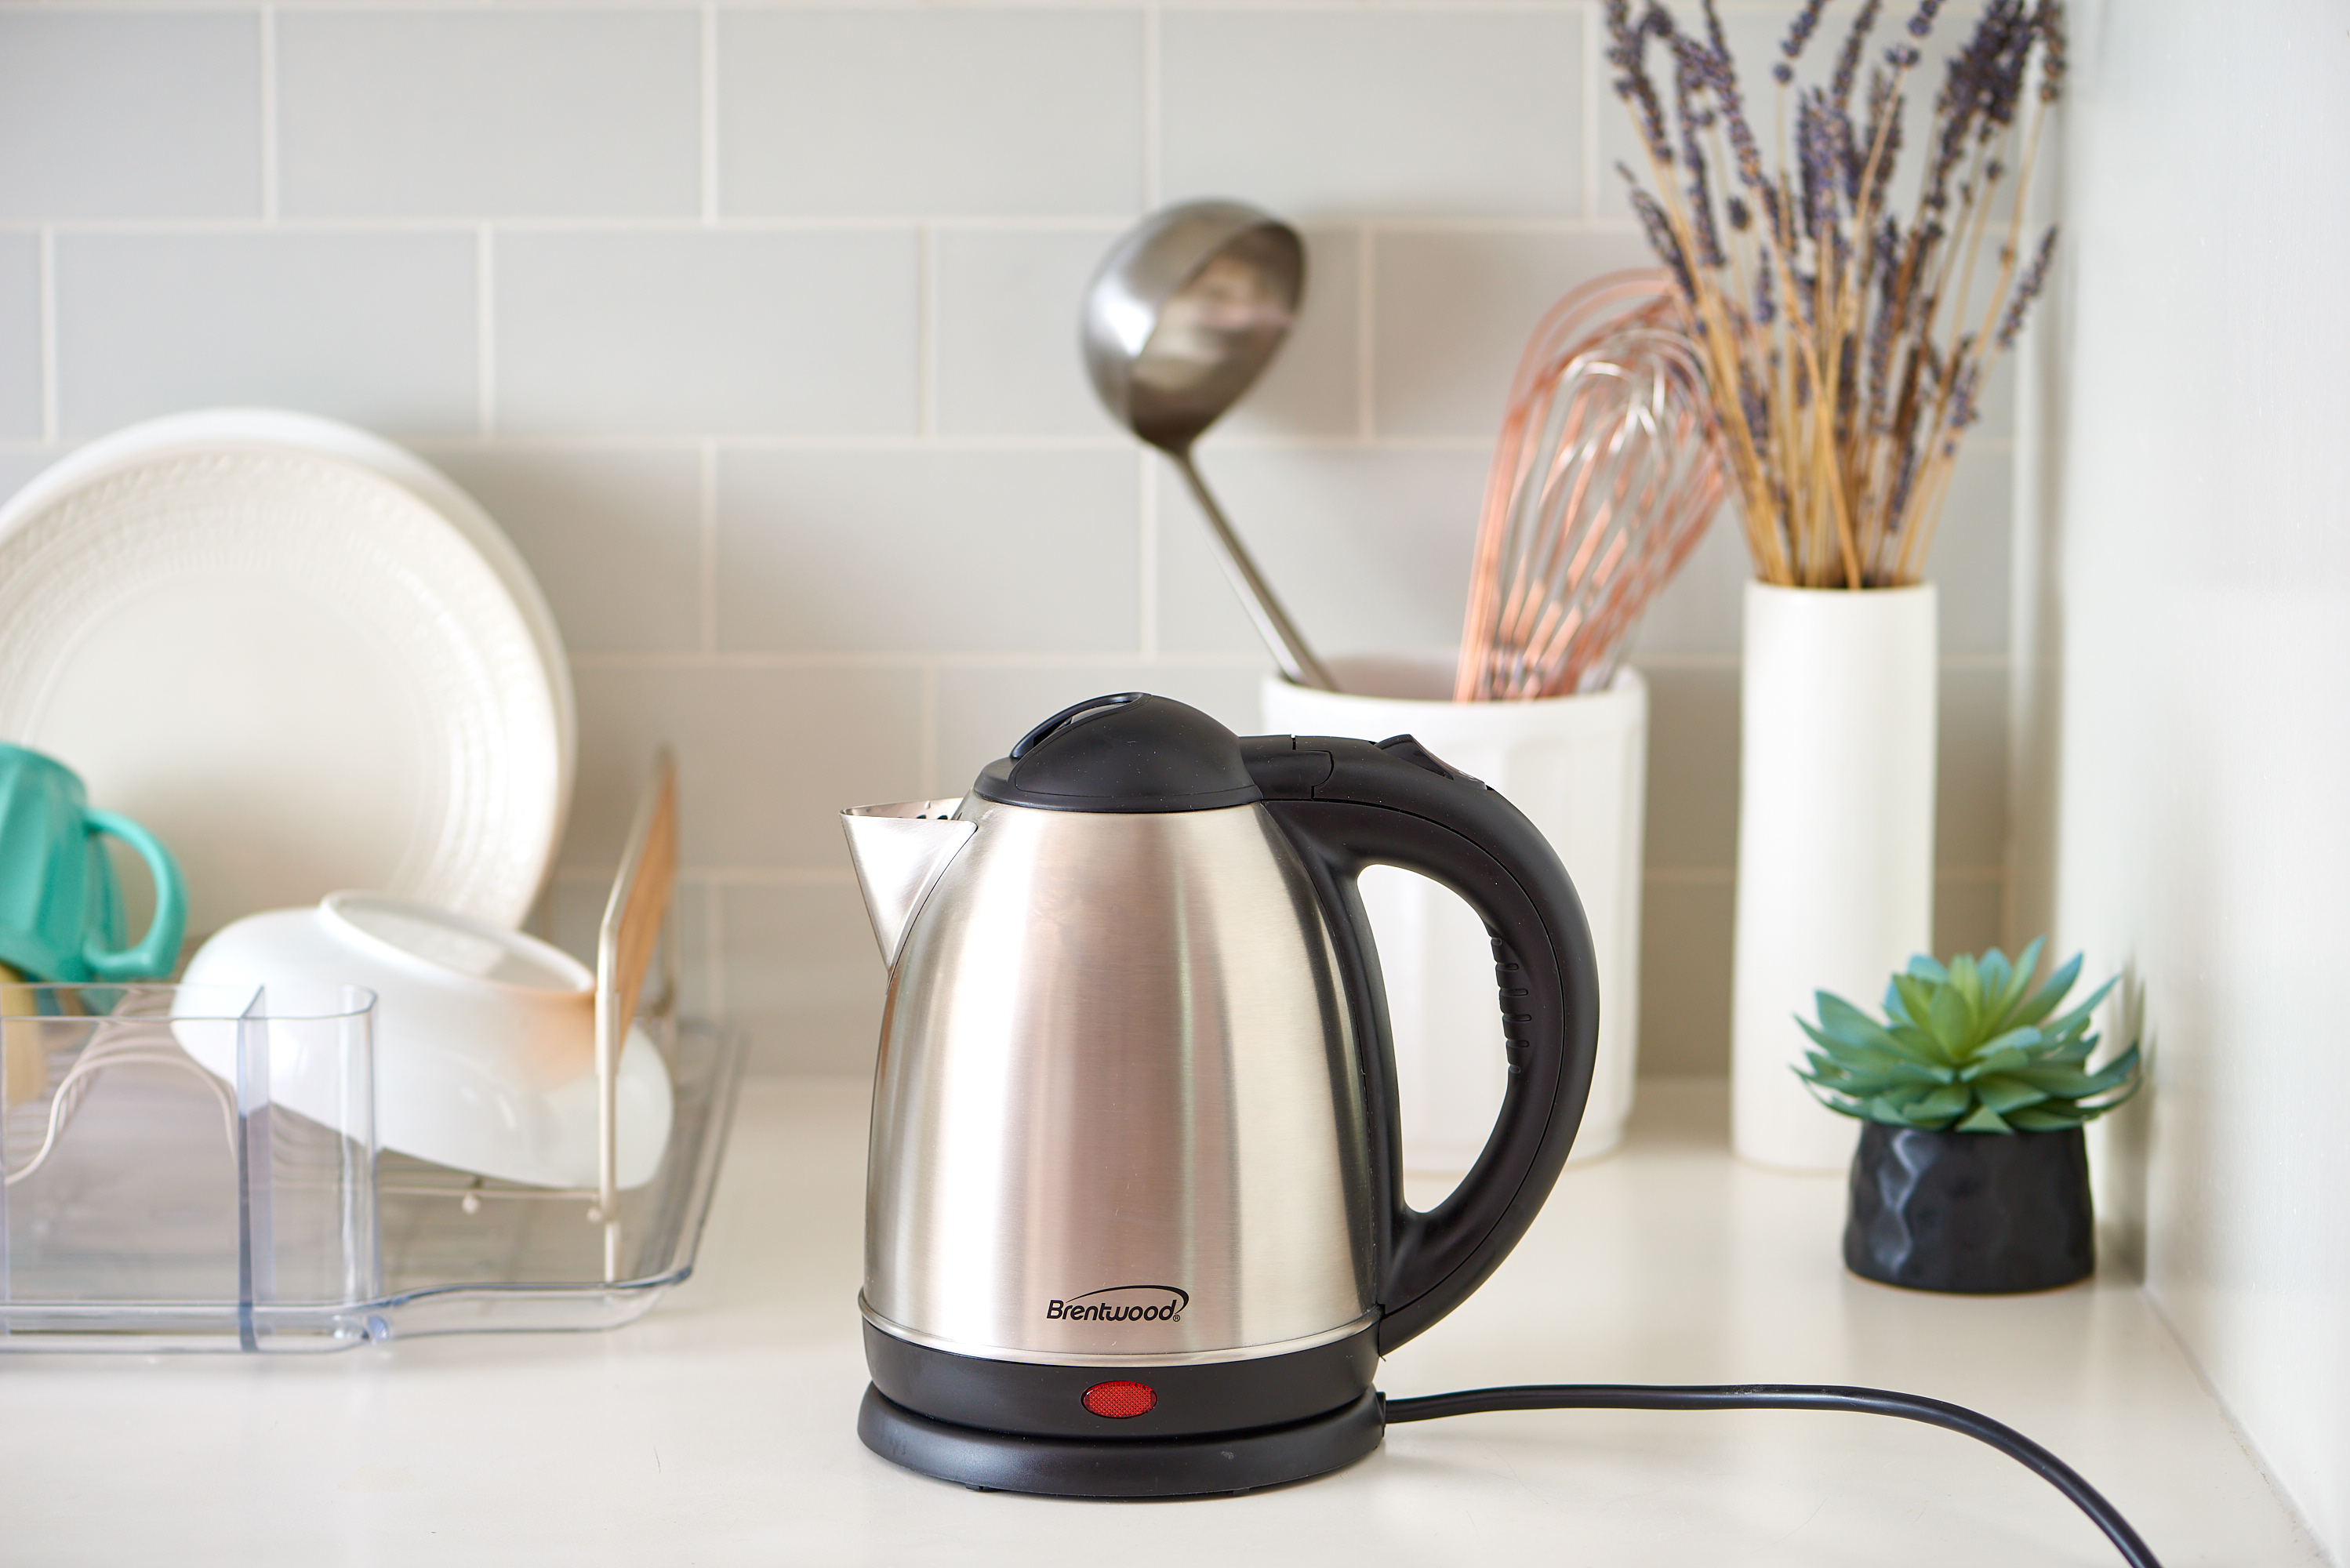 How to keep your electric kettle clean